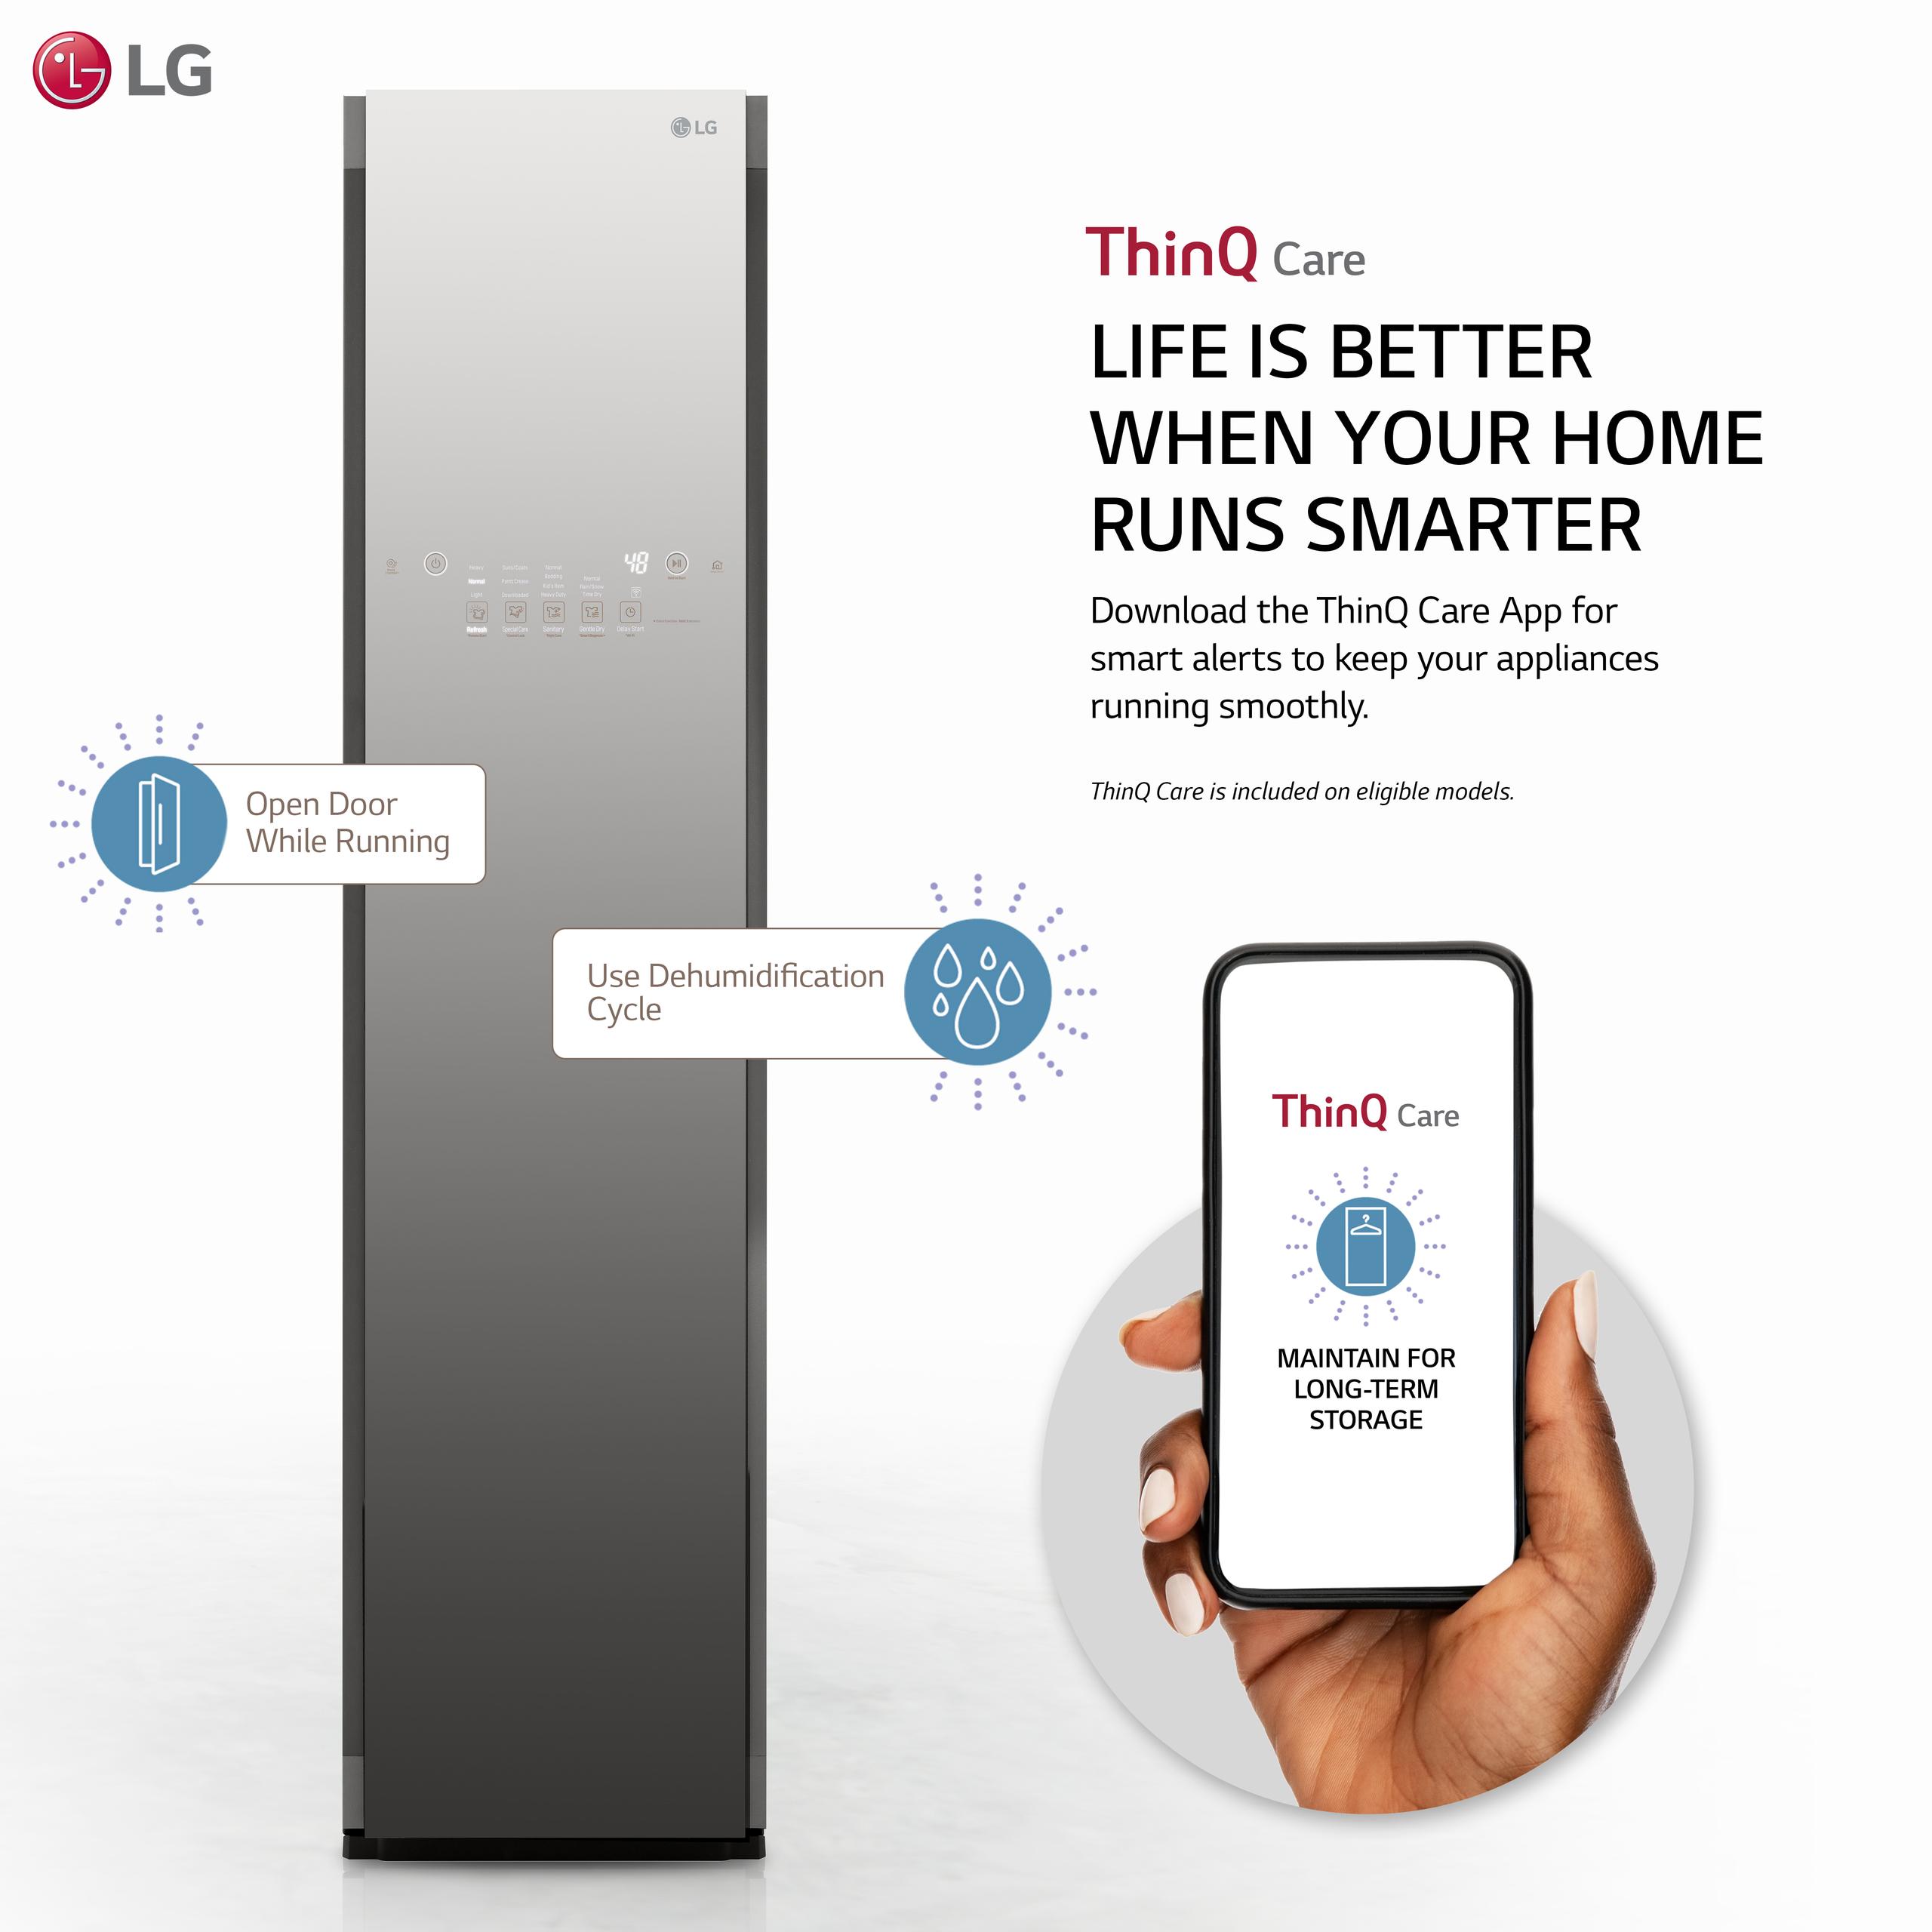 LG Styler® Smart wi-fi Enabled Steam Closet with TrueSteam® Technology and Exclusive Moving Hangers